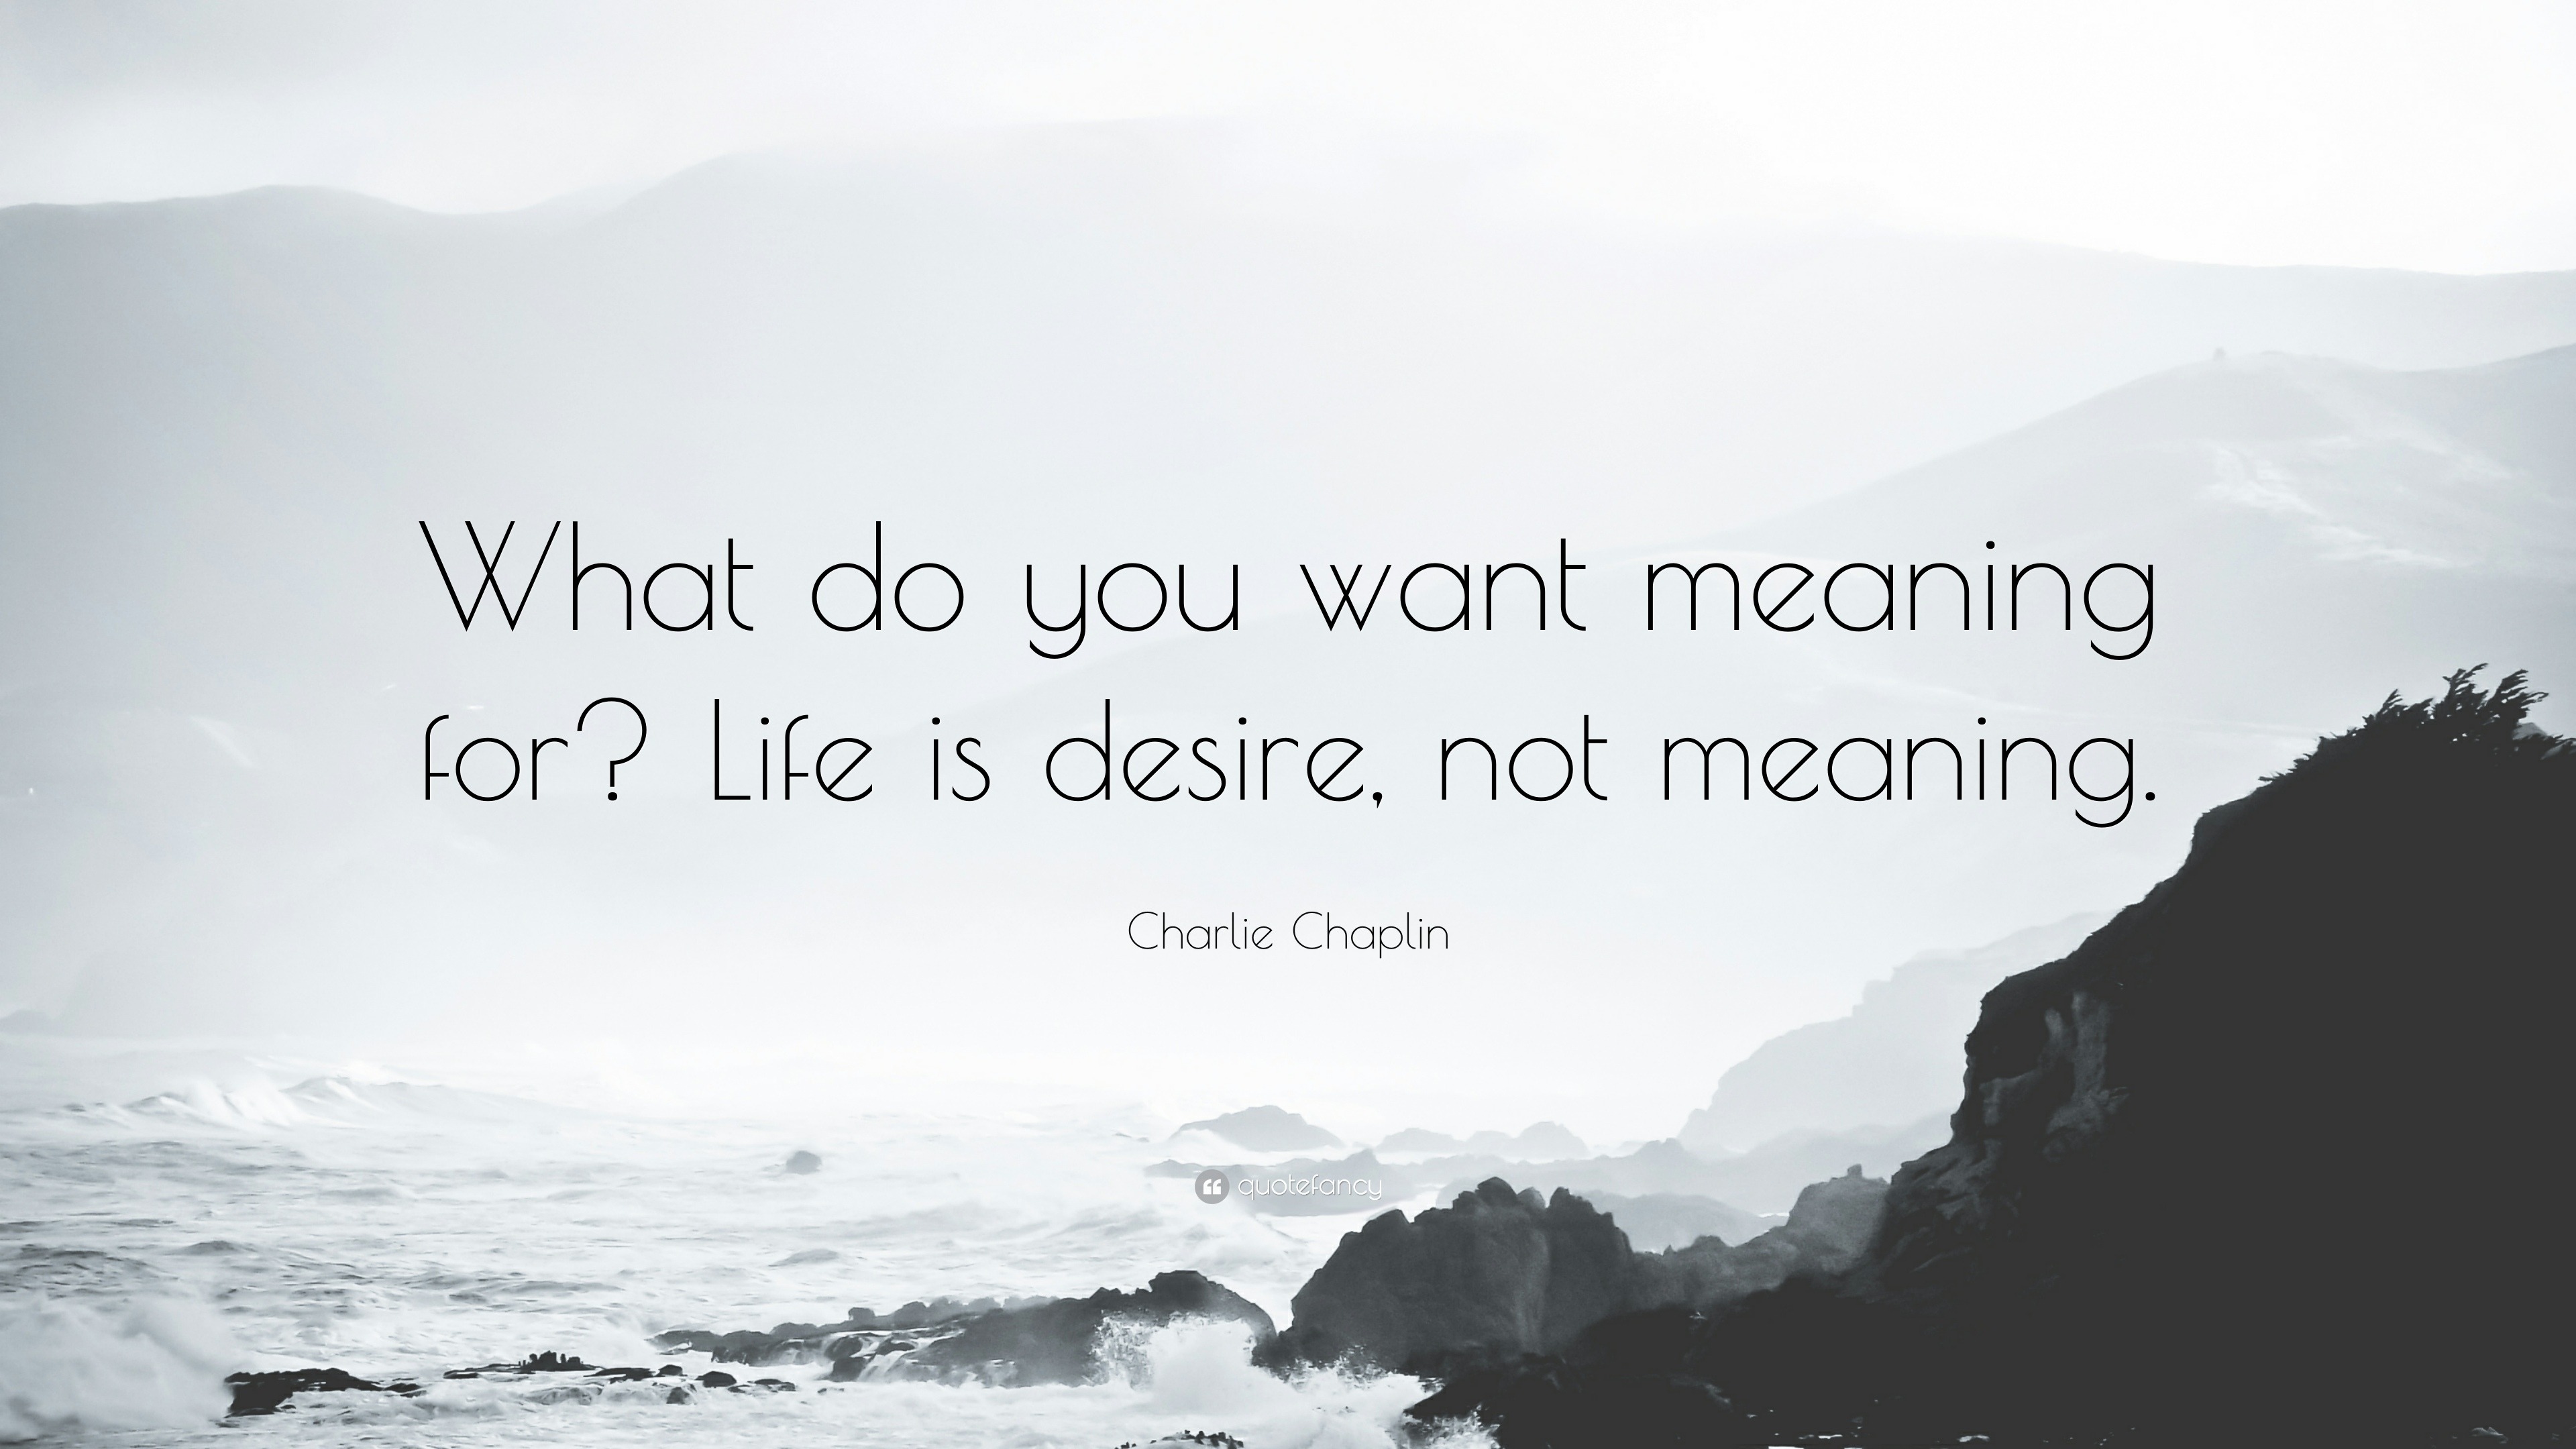 Charlie Chaplin Quote “What do you want meaning for Life is desire